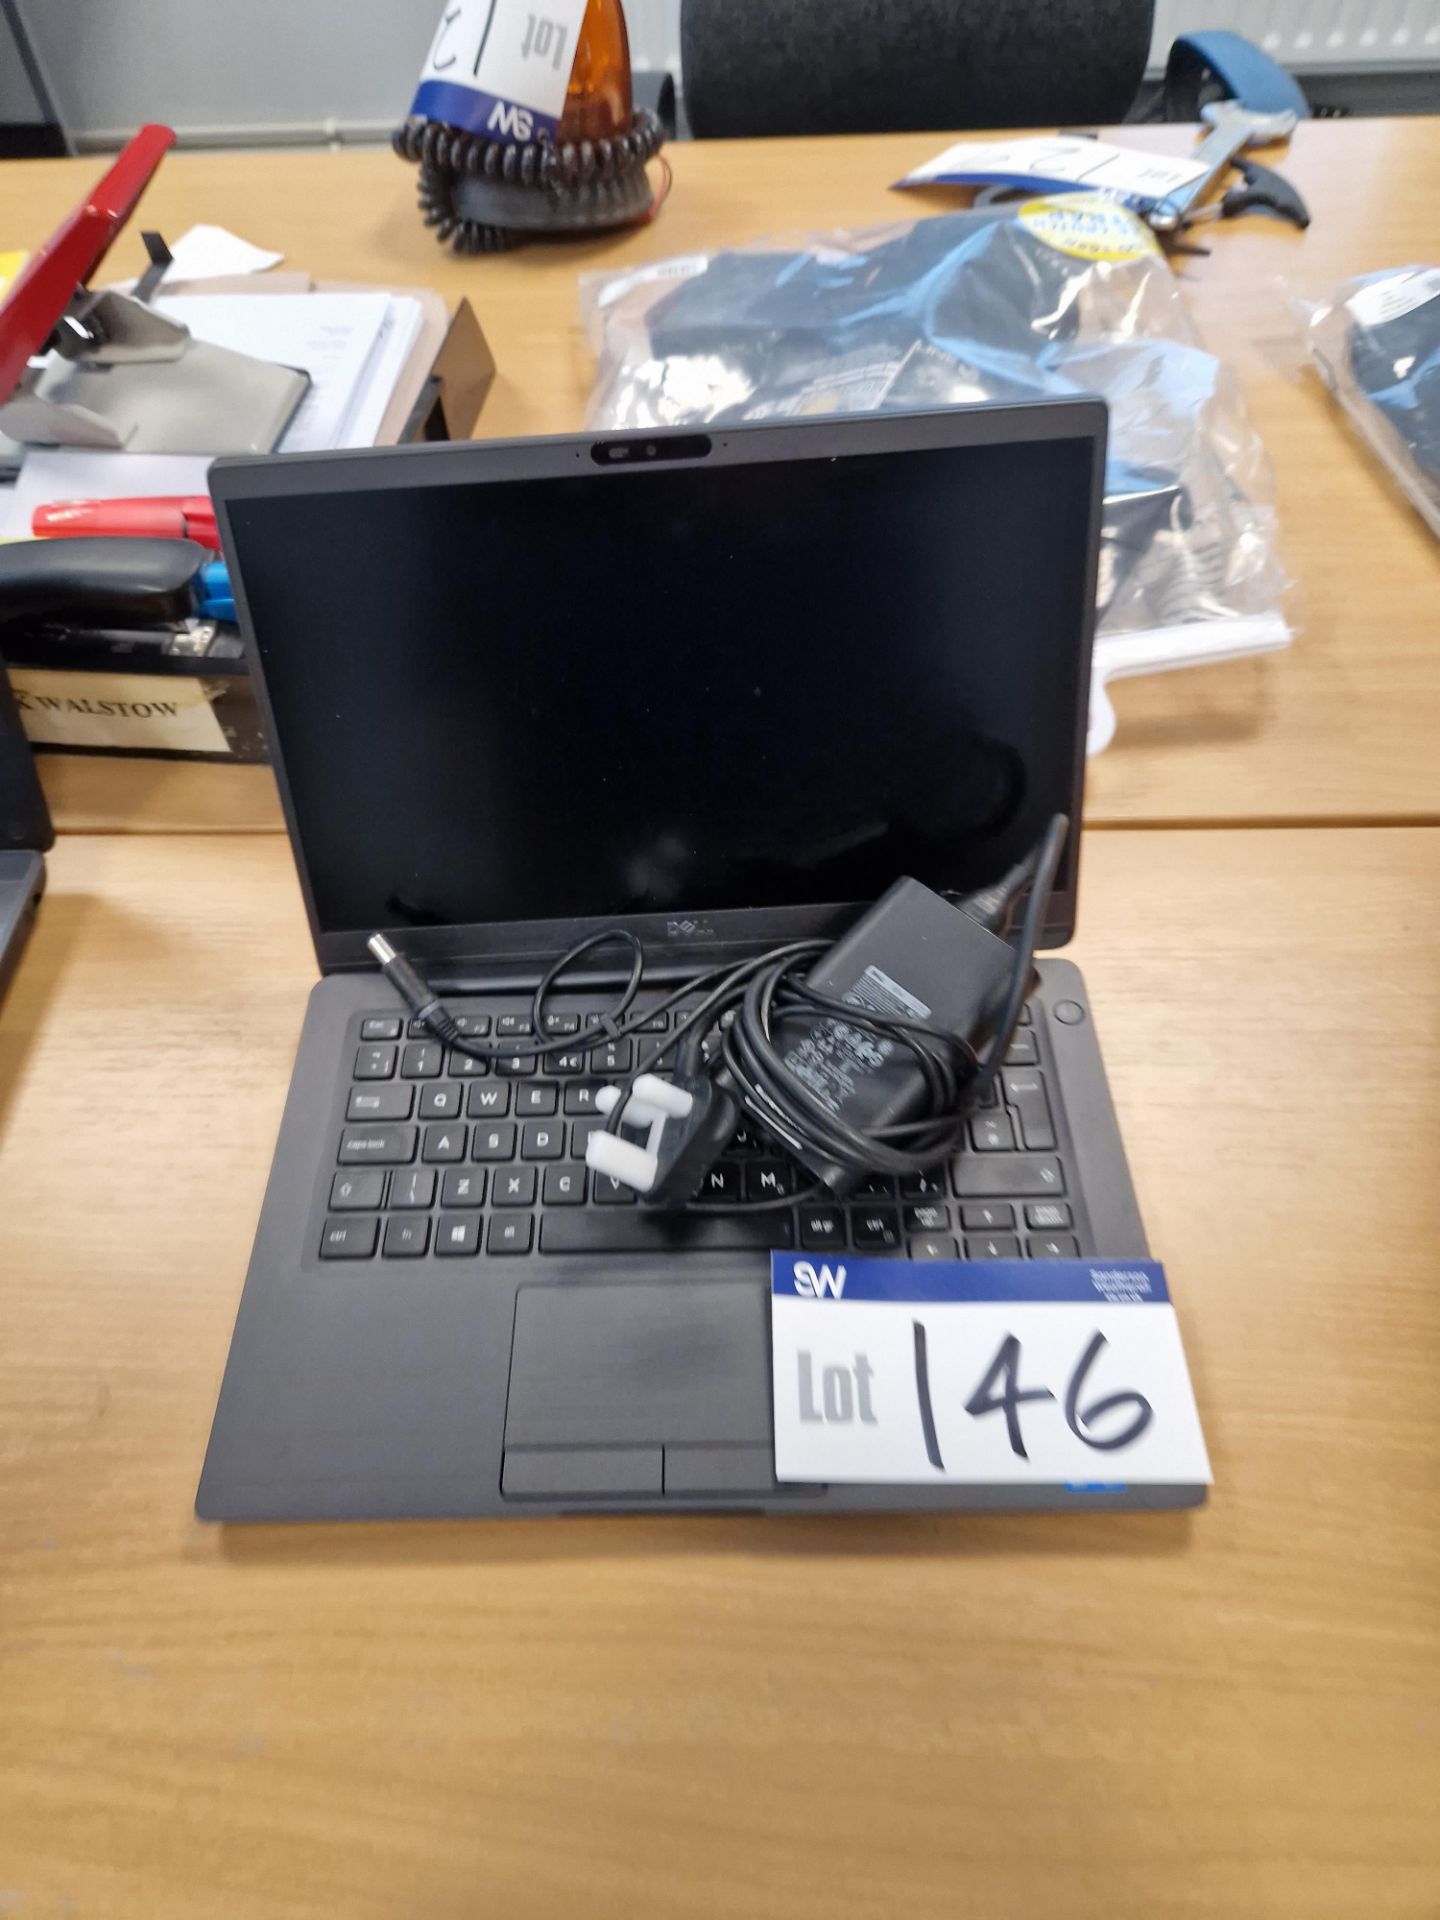 IPC Green553 Laptop (No Charger) (Condition Unknown) (Hard Drive Removed) Please read the